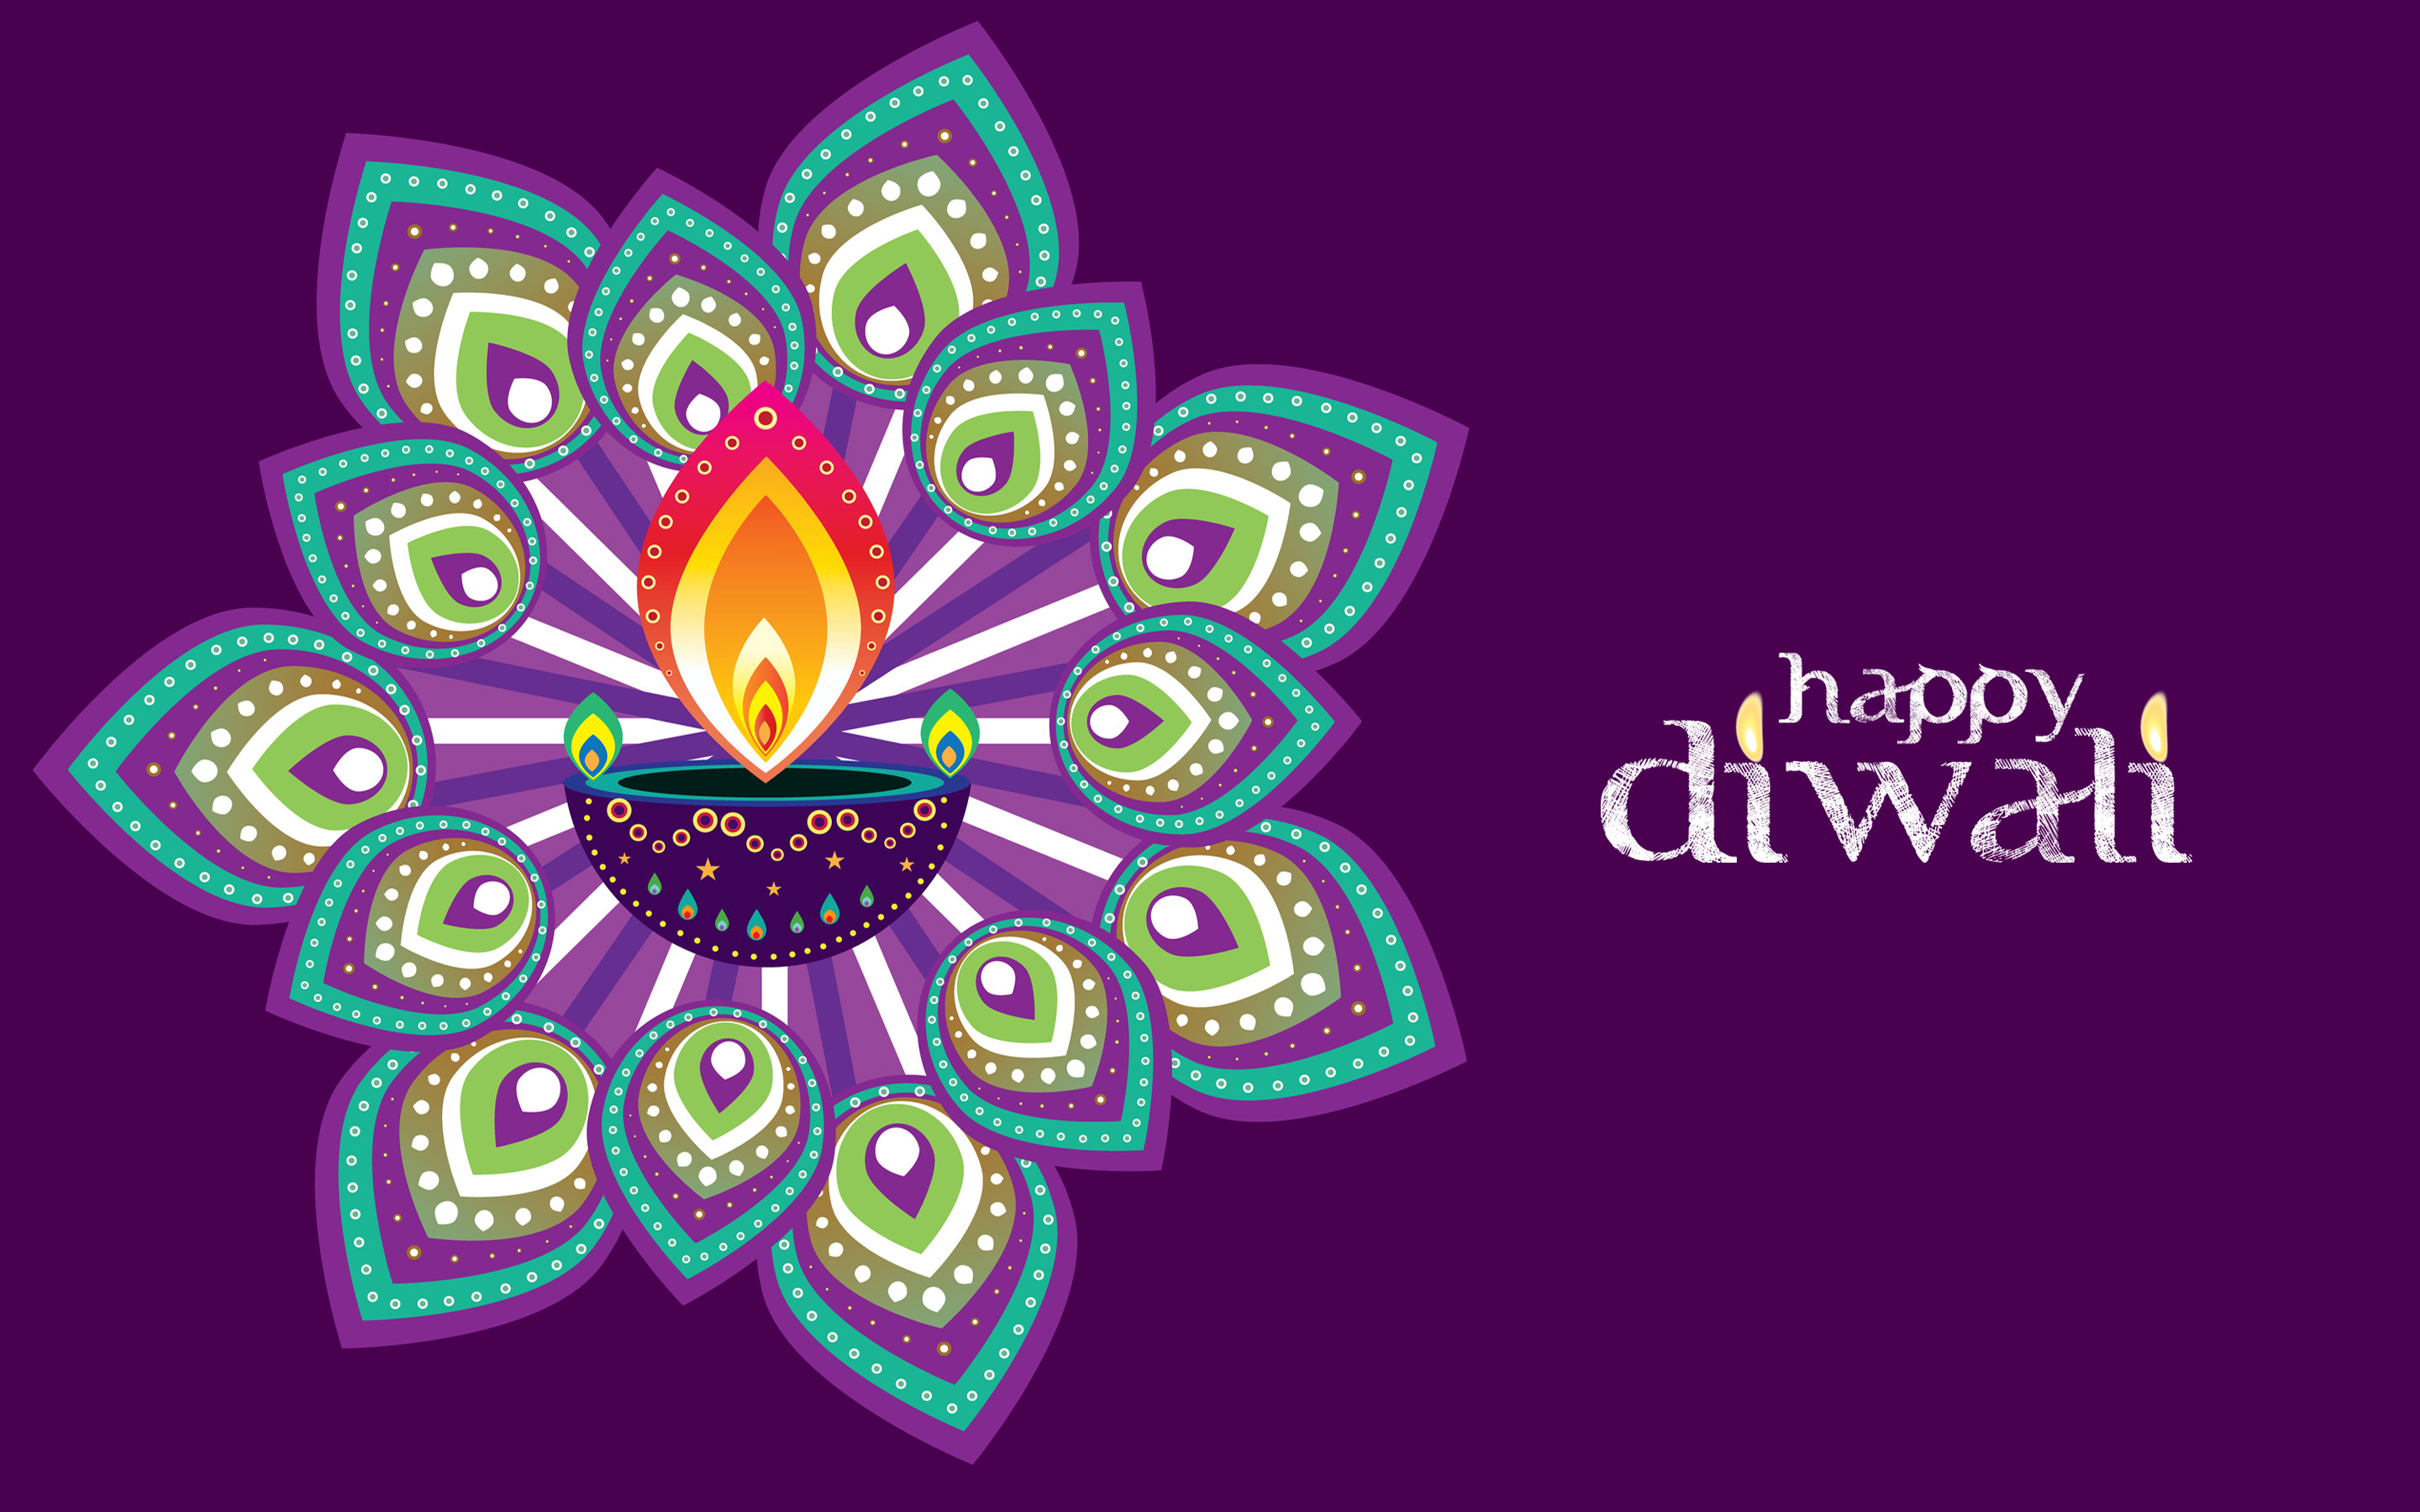 2880x1800 30 Colorful Diwali Greeting card Designs - Diwali is one of most famous  Hindu festivals celebrated with lamps, crackers etc. This is the great  festival of